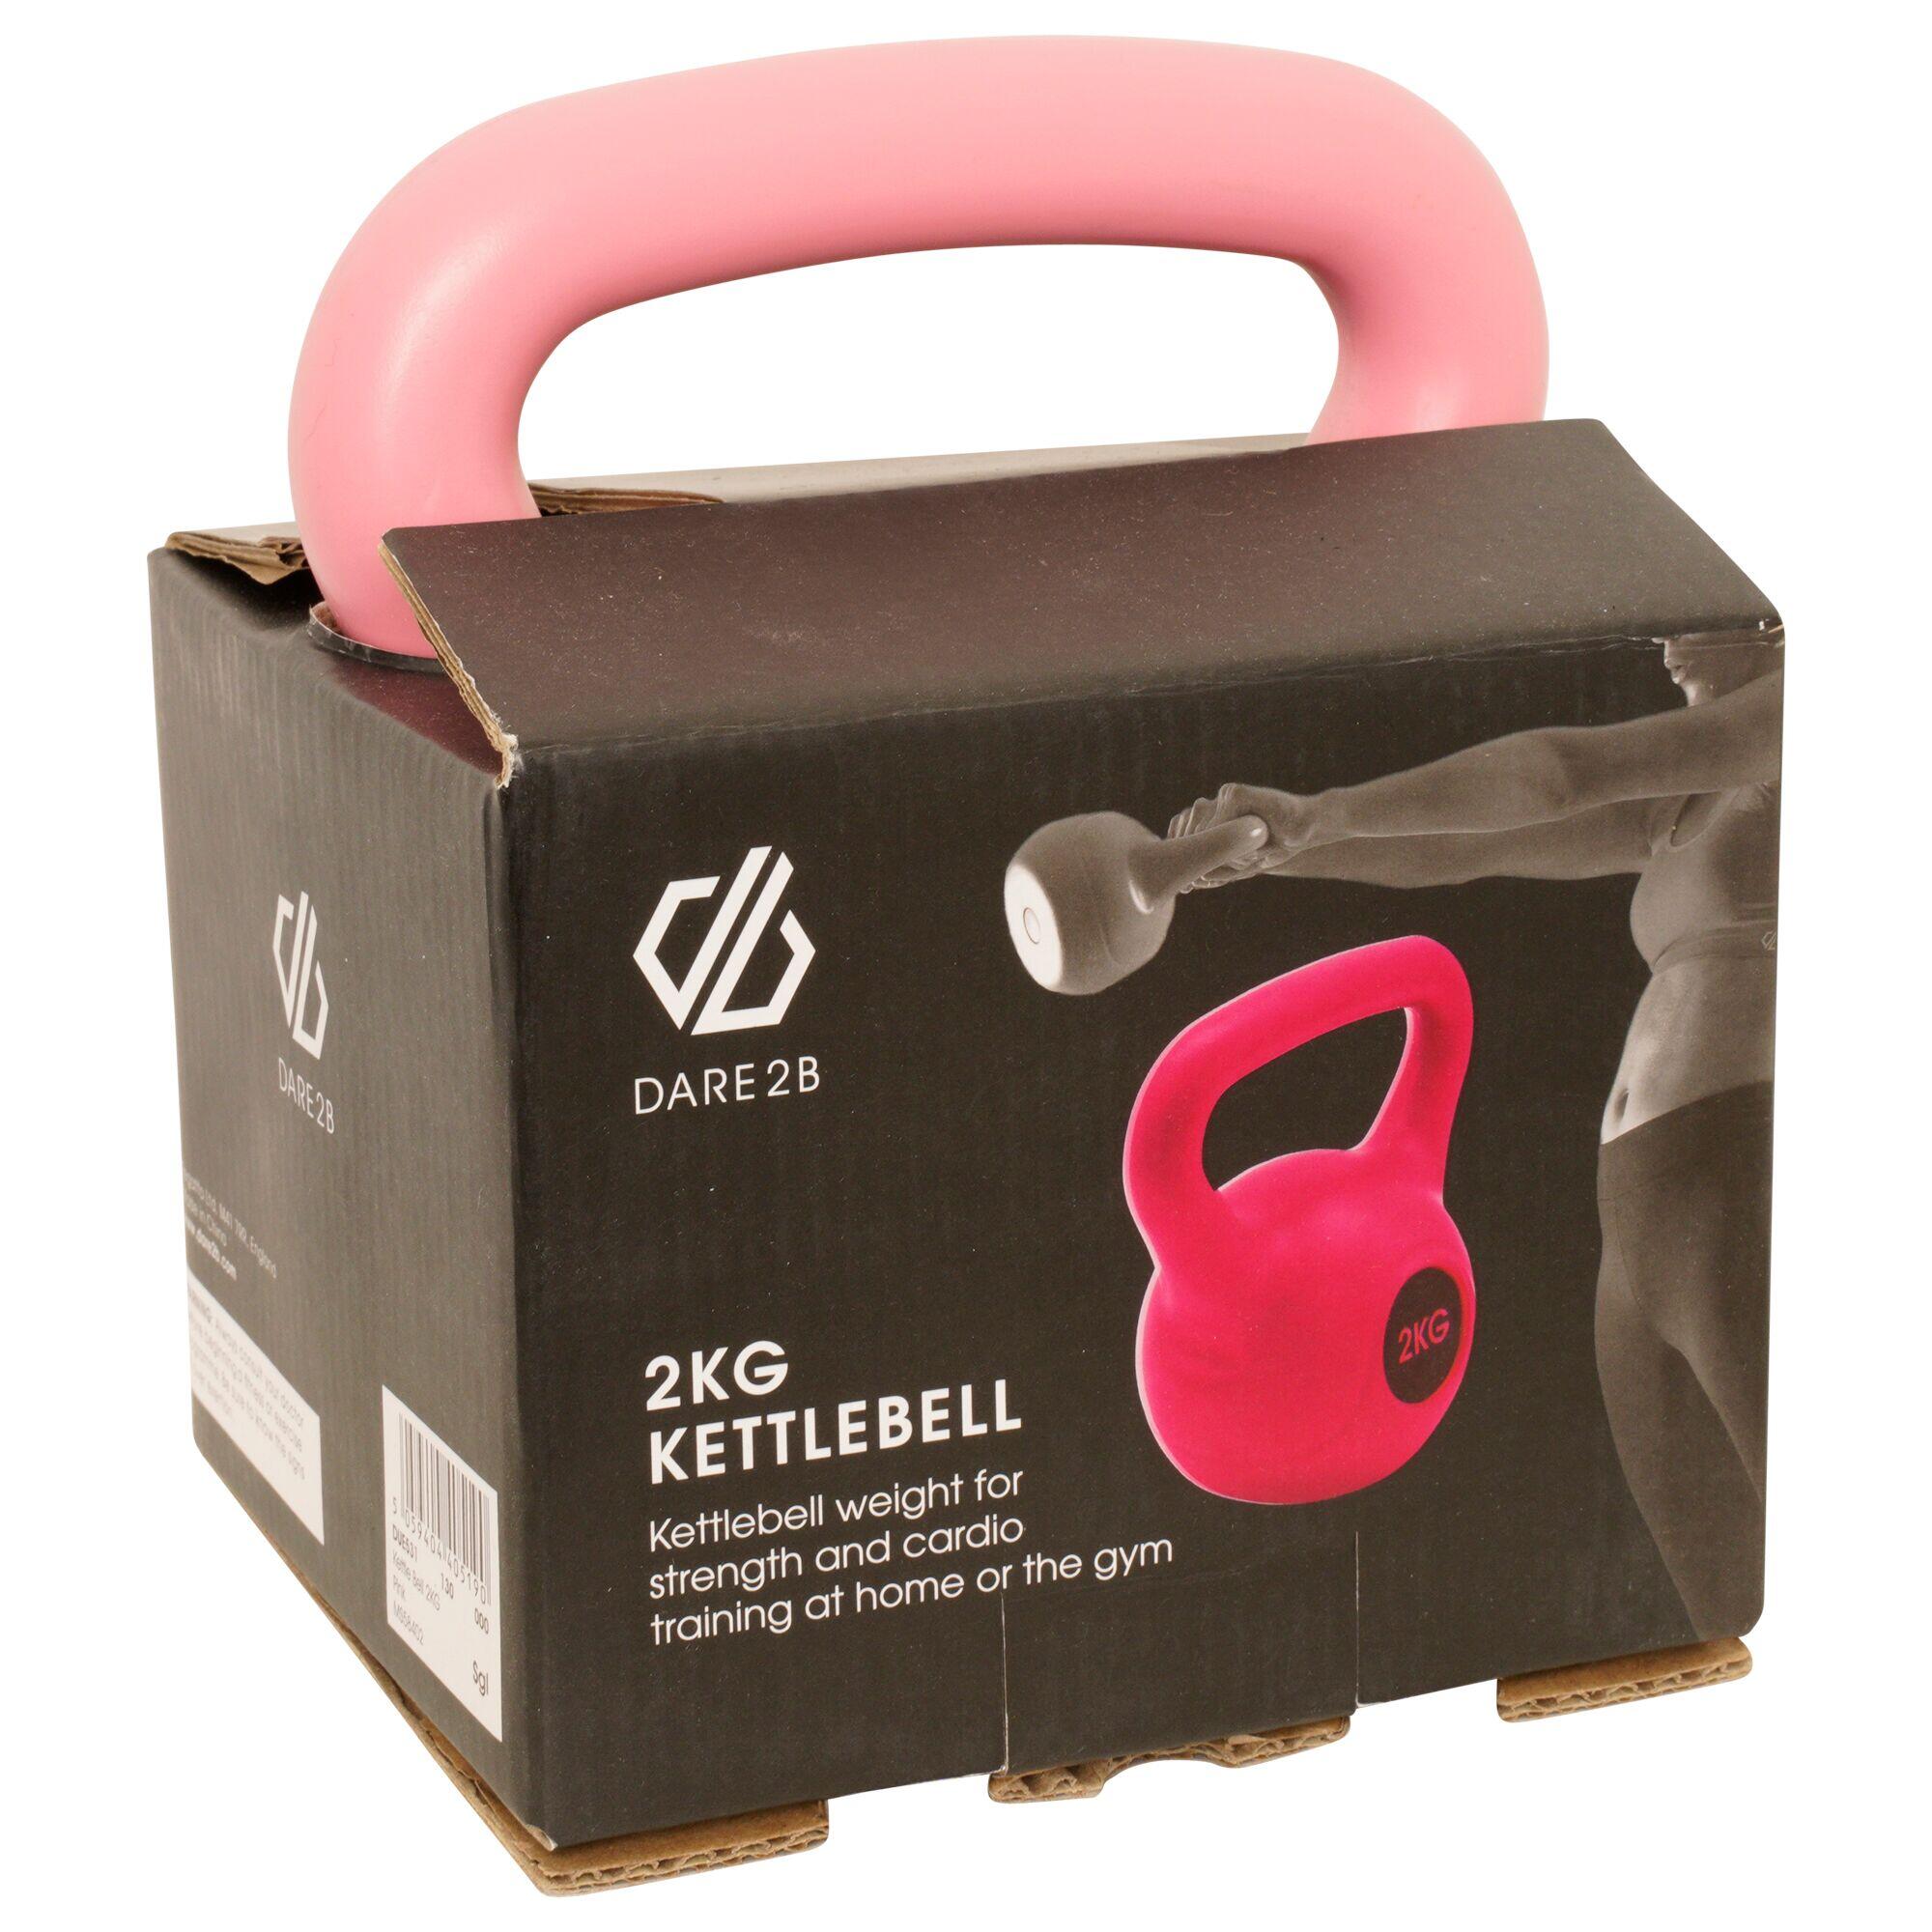 DARE 2B Adults' Home Fitness 2KG Kettlebell - Pink